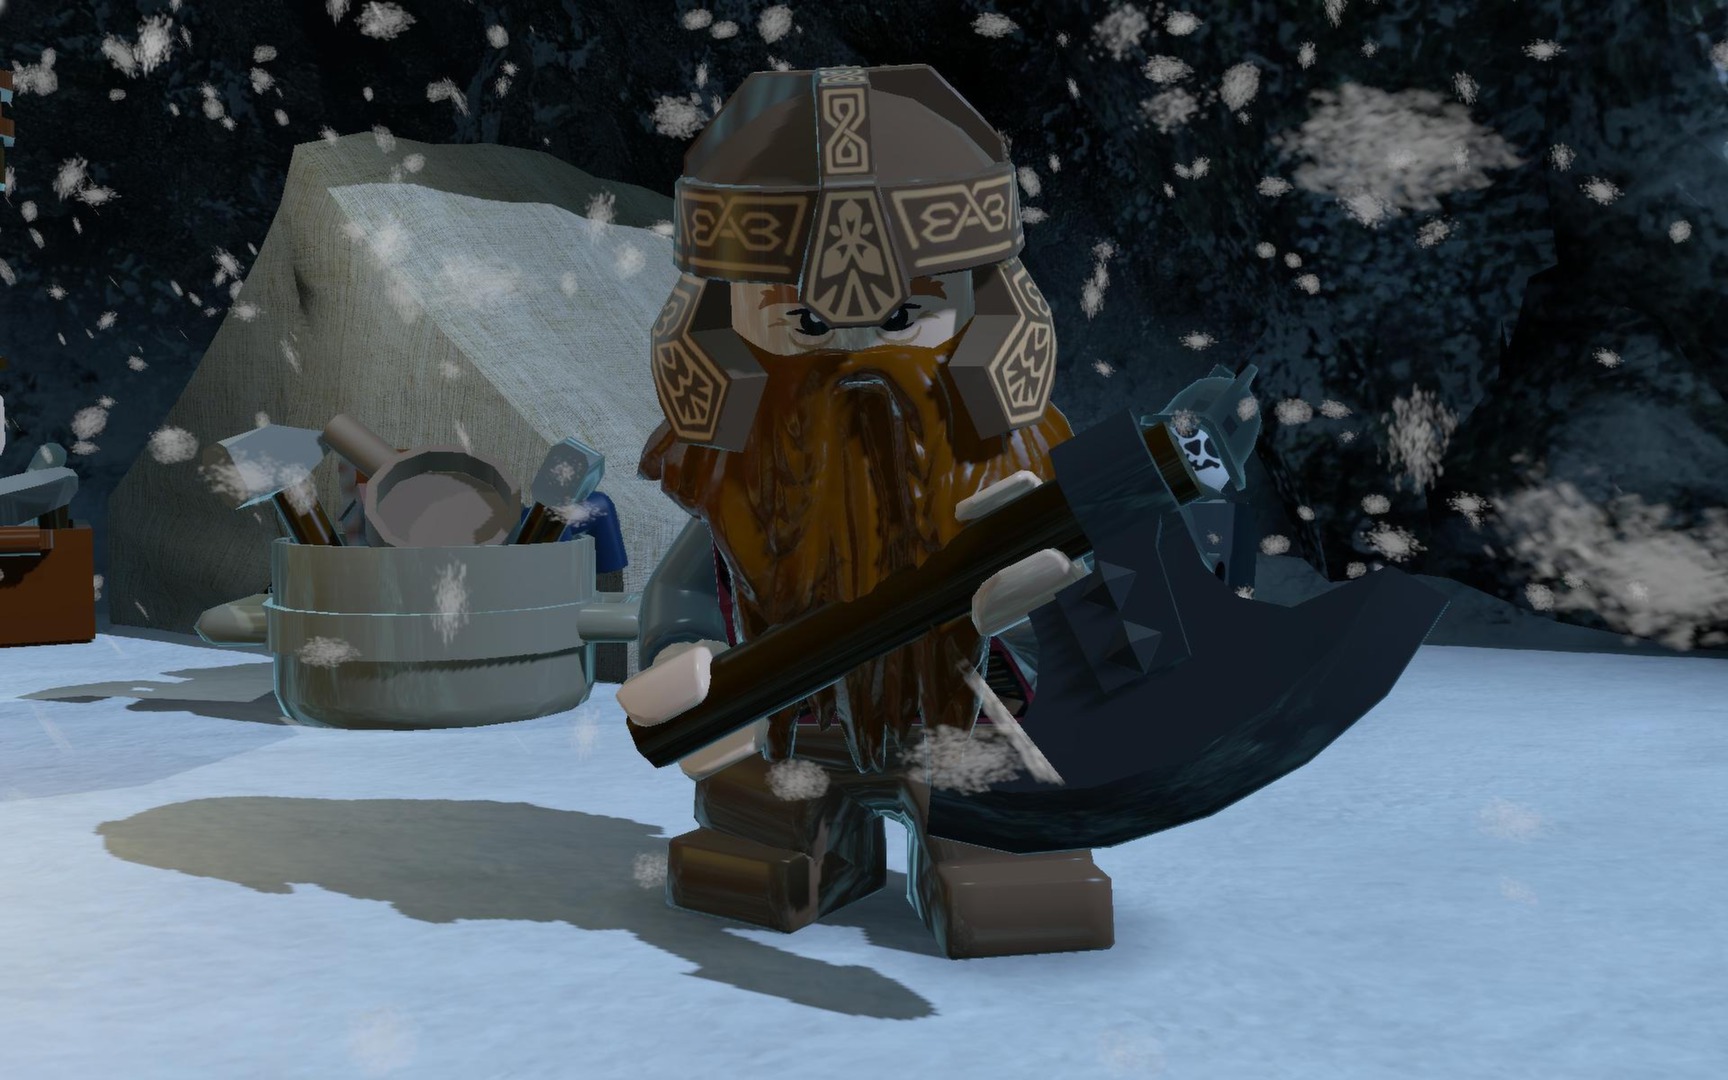 Save 80% on LEGO® The Lord of the Rings™ on Steam